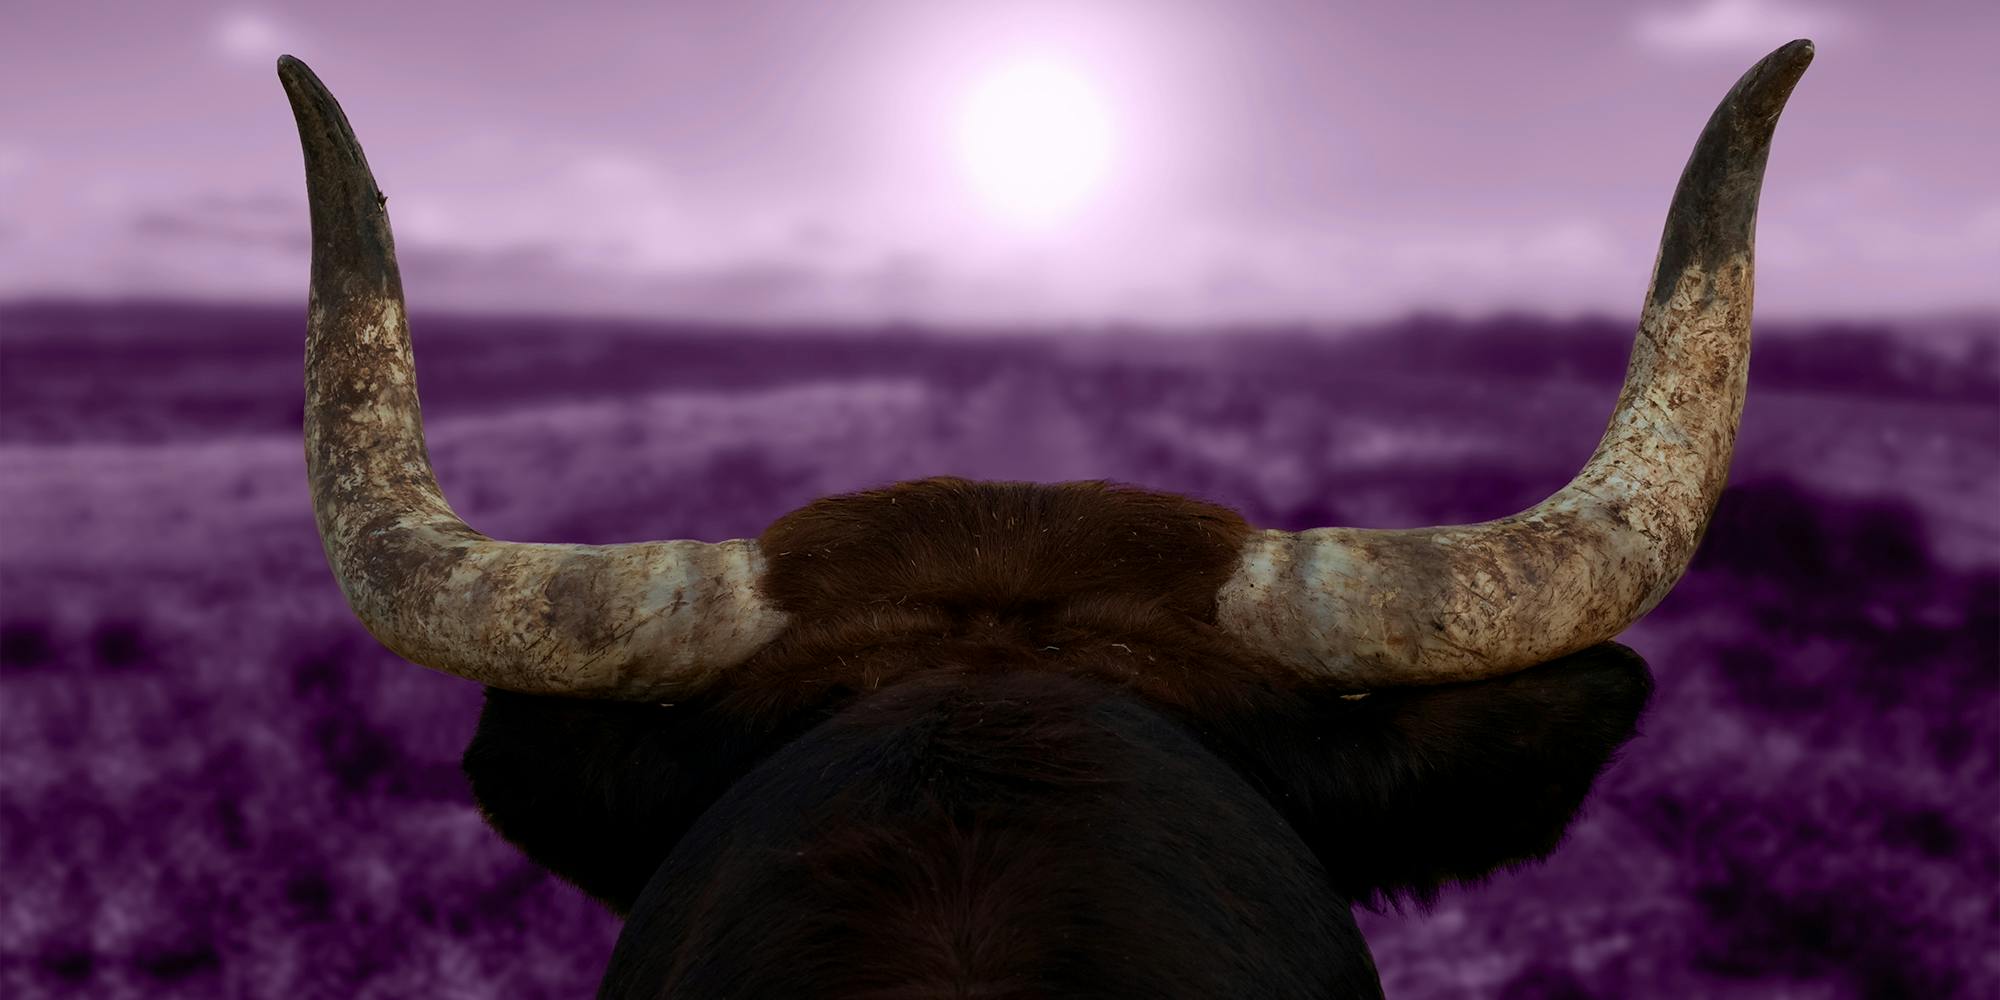 By The Horns: My Life And Sexuality As A Bull